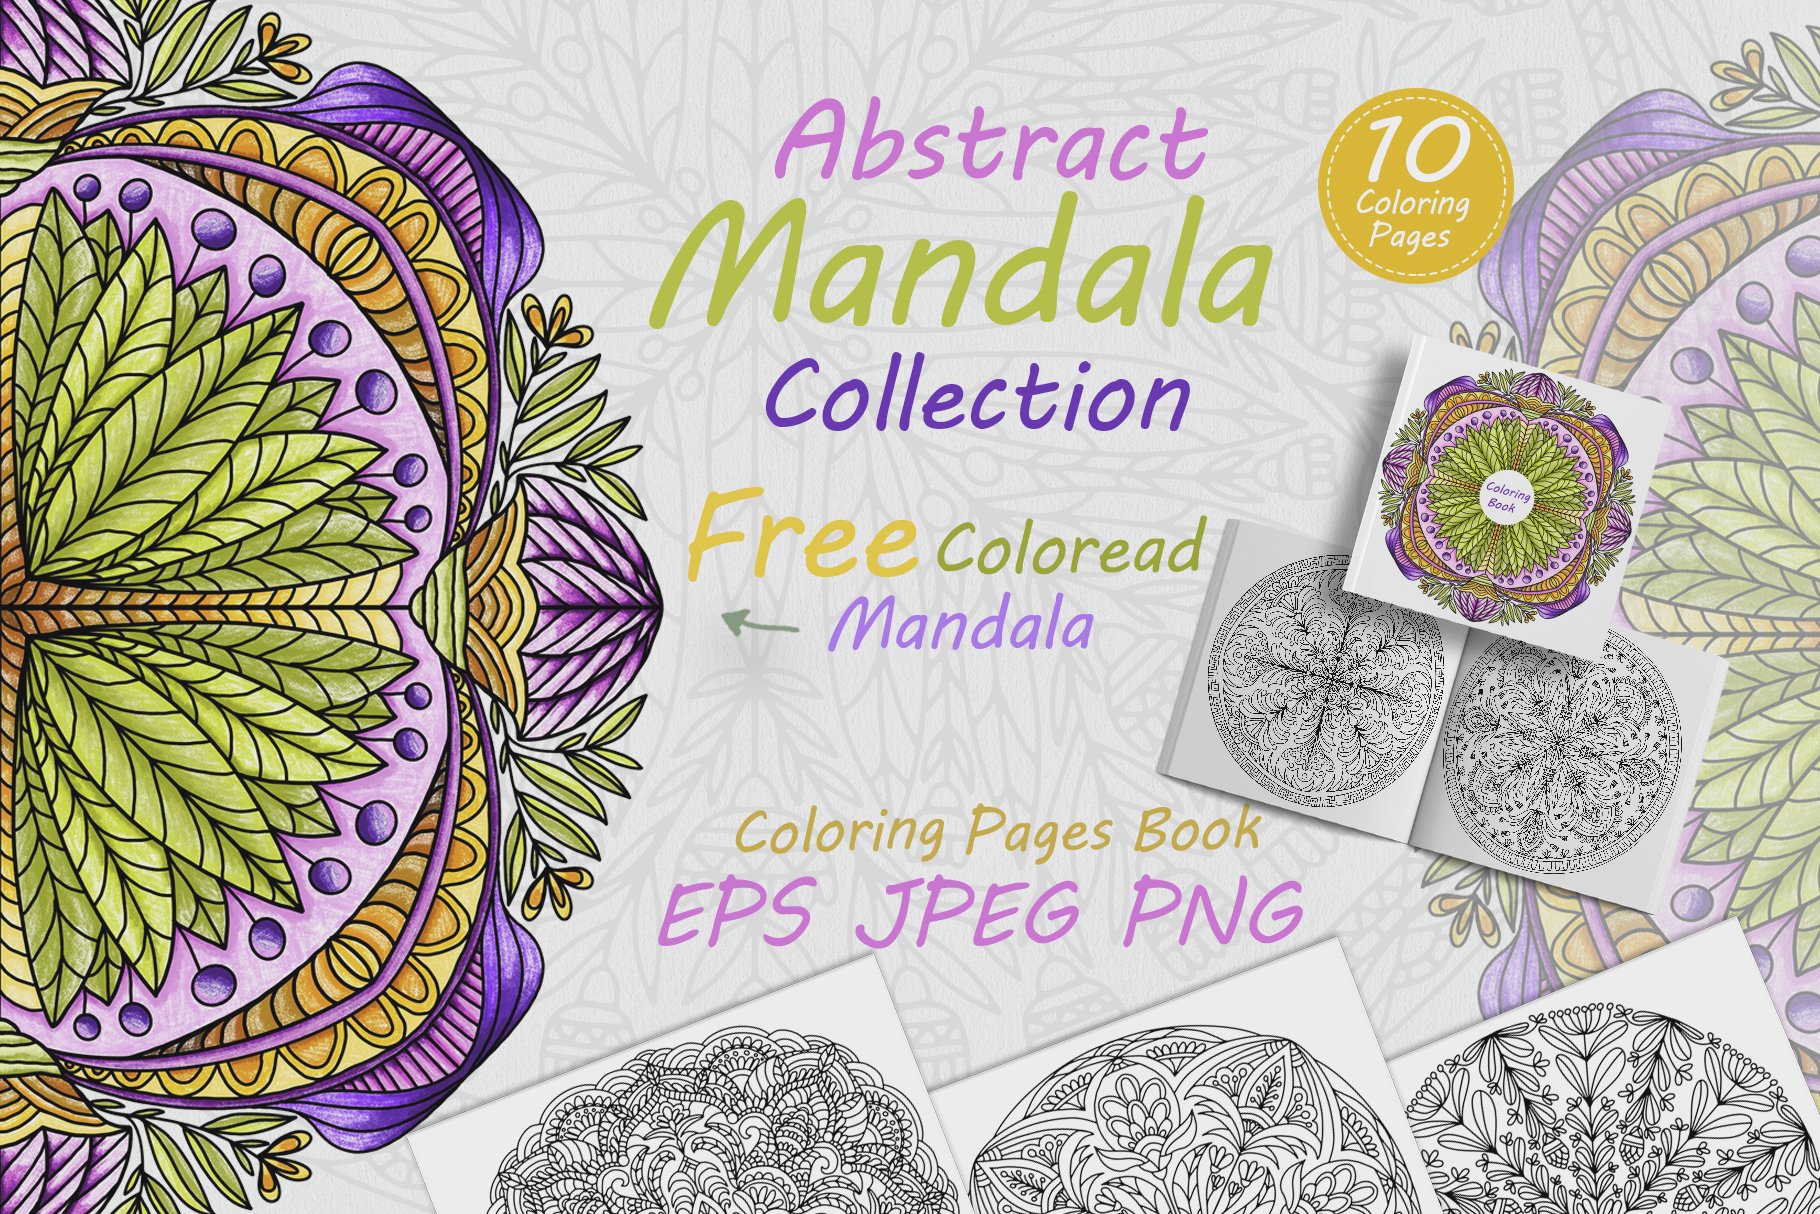 Collection of hand drawn mandalascover image.